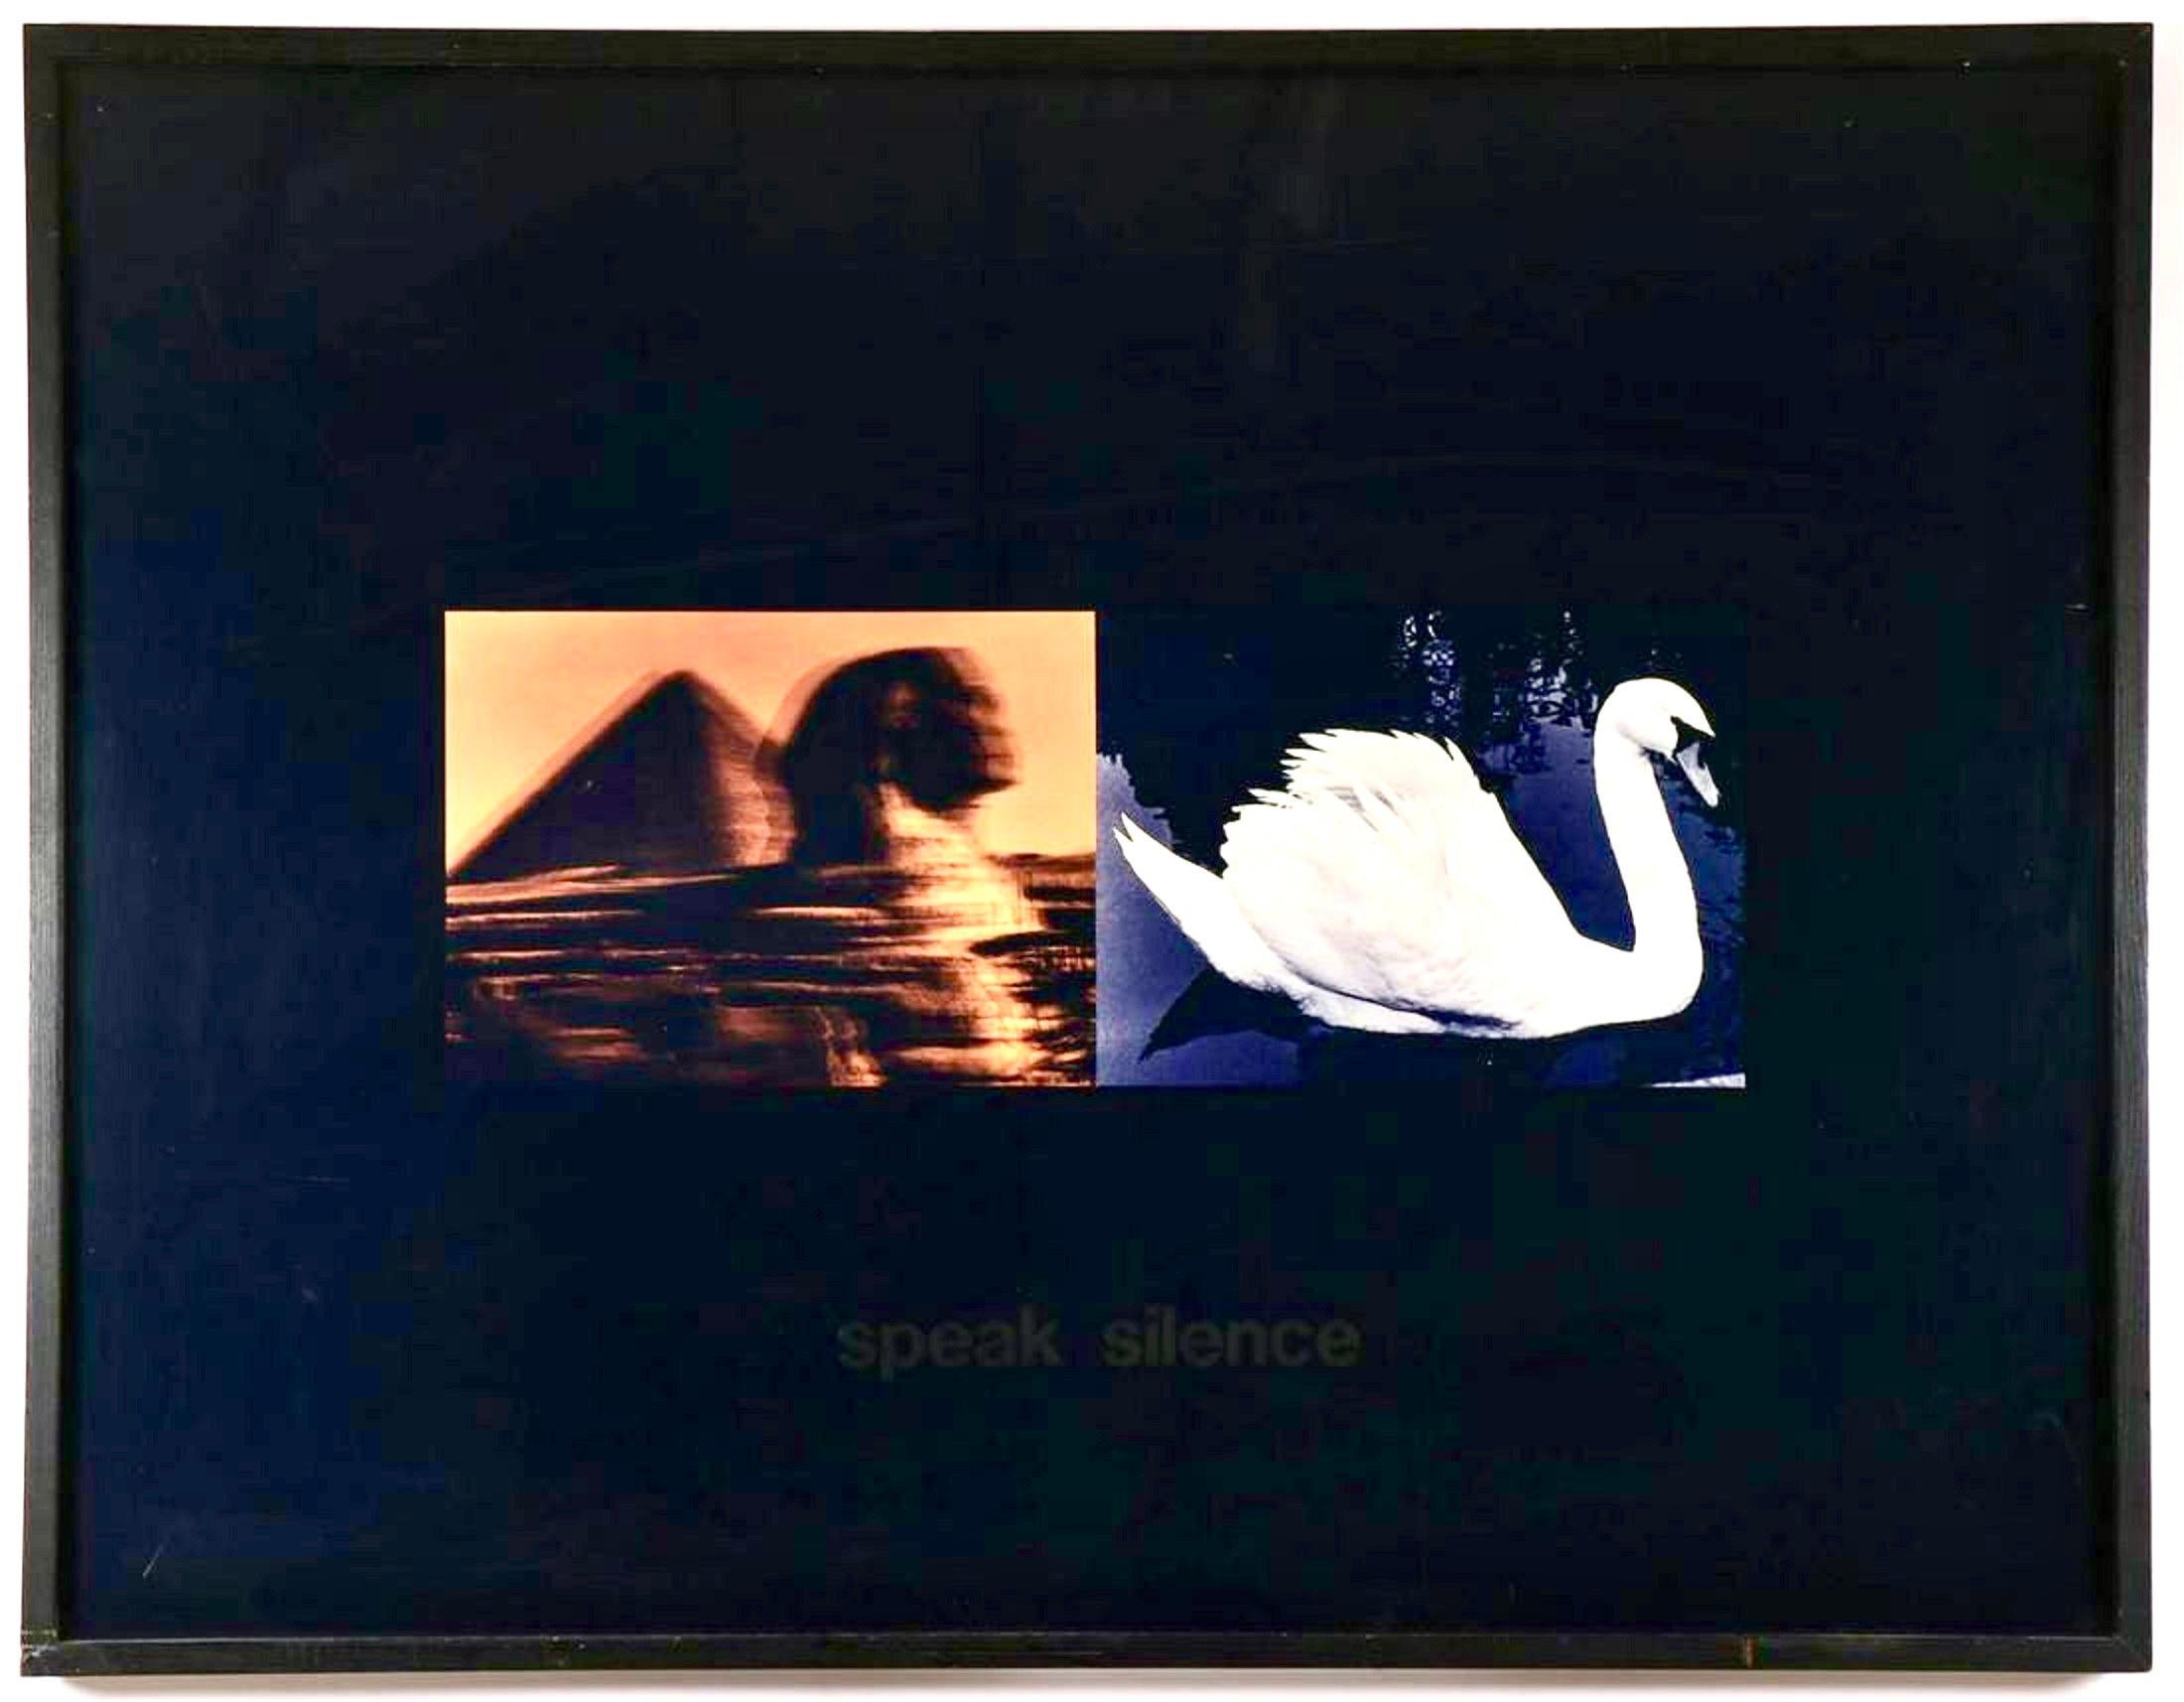 SOREL COHEN  (Canadian b. 1936 - )
Speak Silence- 1978
Ektacolor photograph and vinyl letter typography
Verso with gallery label for Wynick/Tuck Gallery, Toronto, Ontario
41 inches x 53 inches 
edition of 3

The original receipt included with this